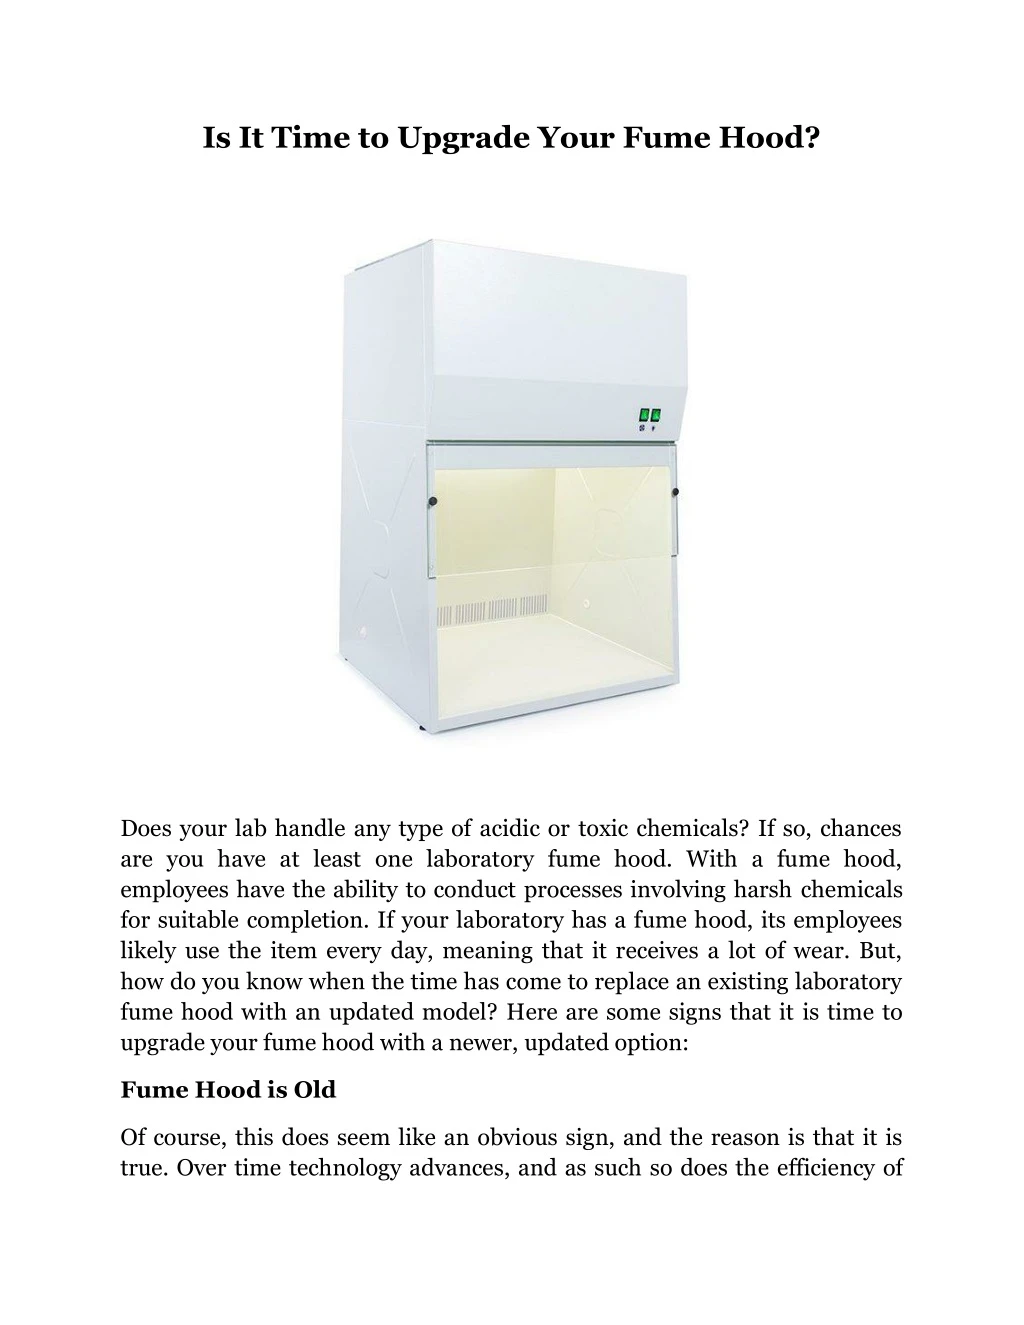 is it time to upgrade your fume hood